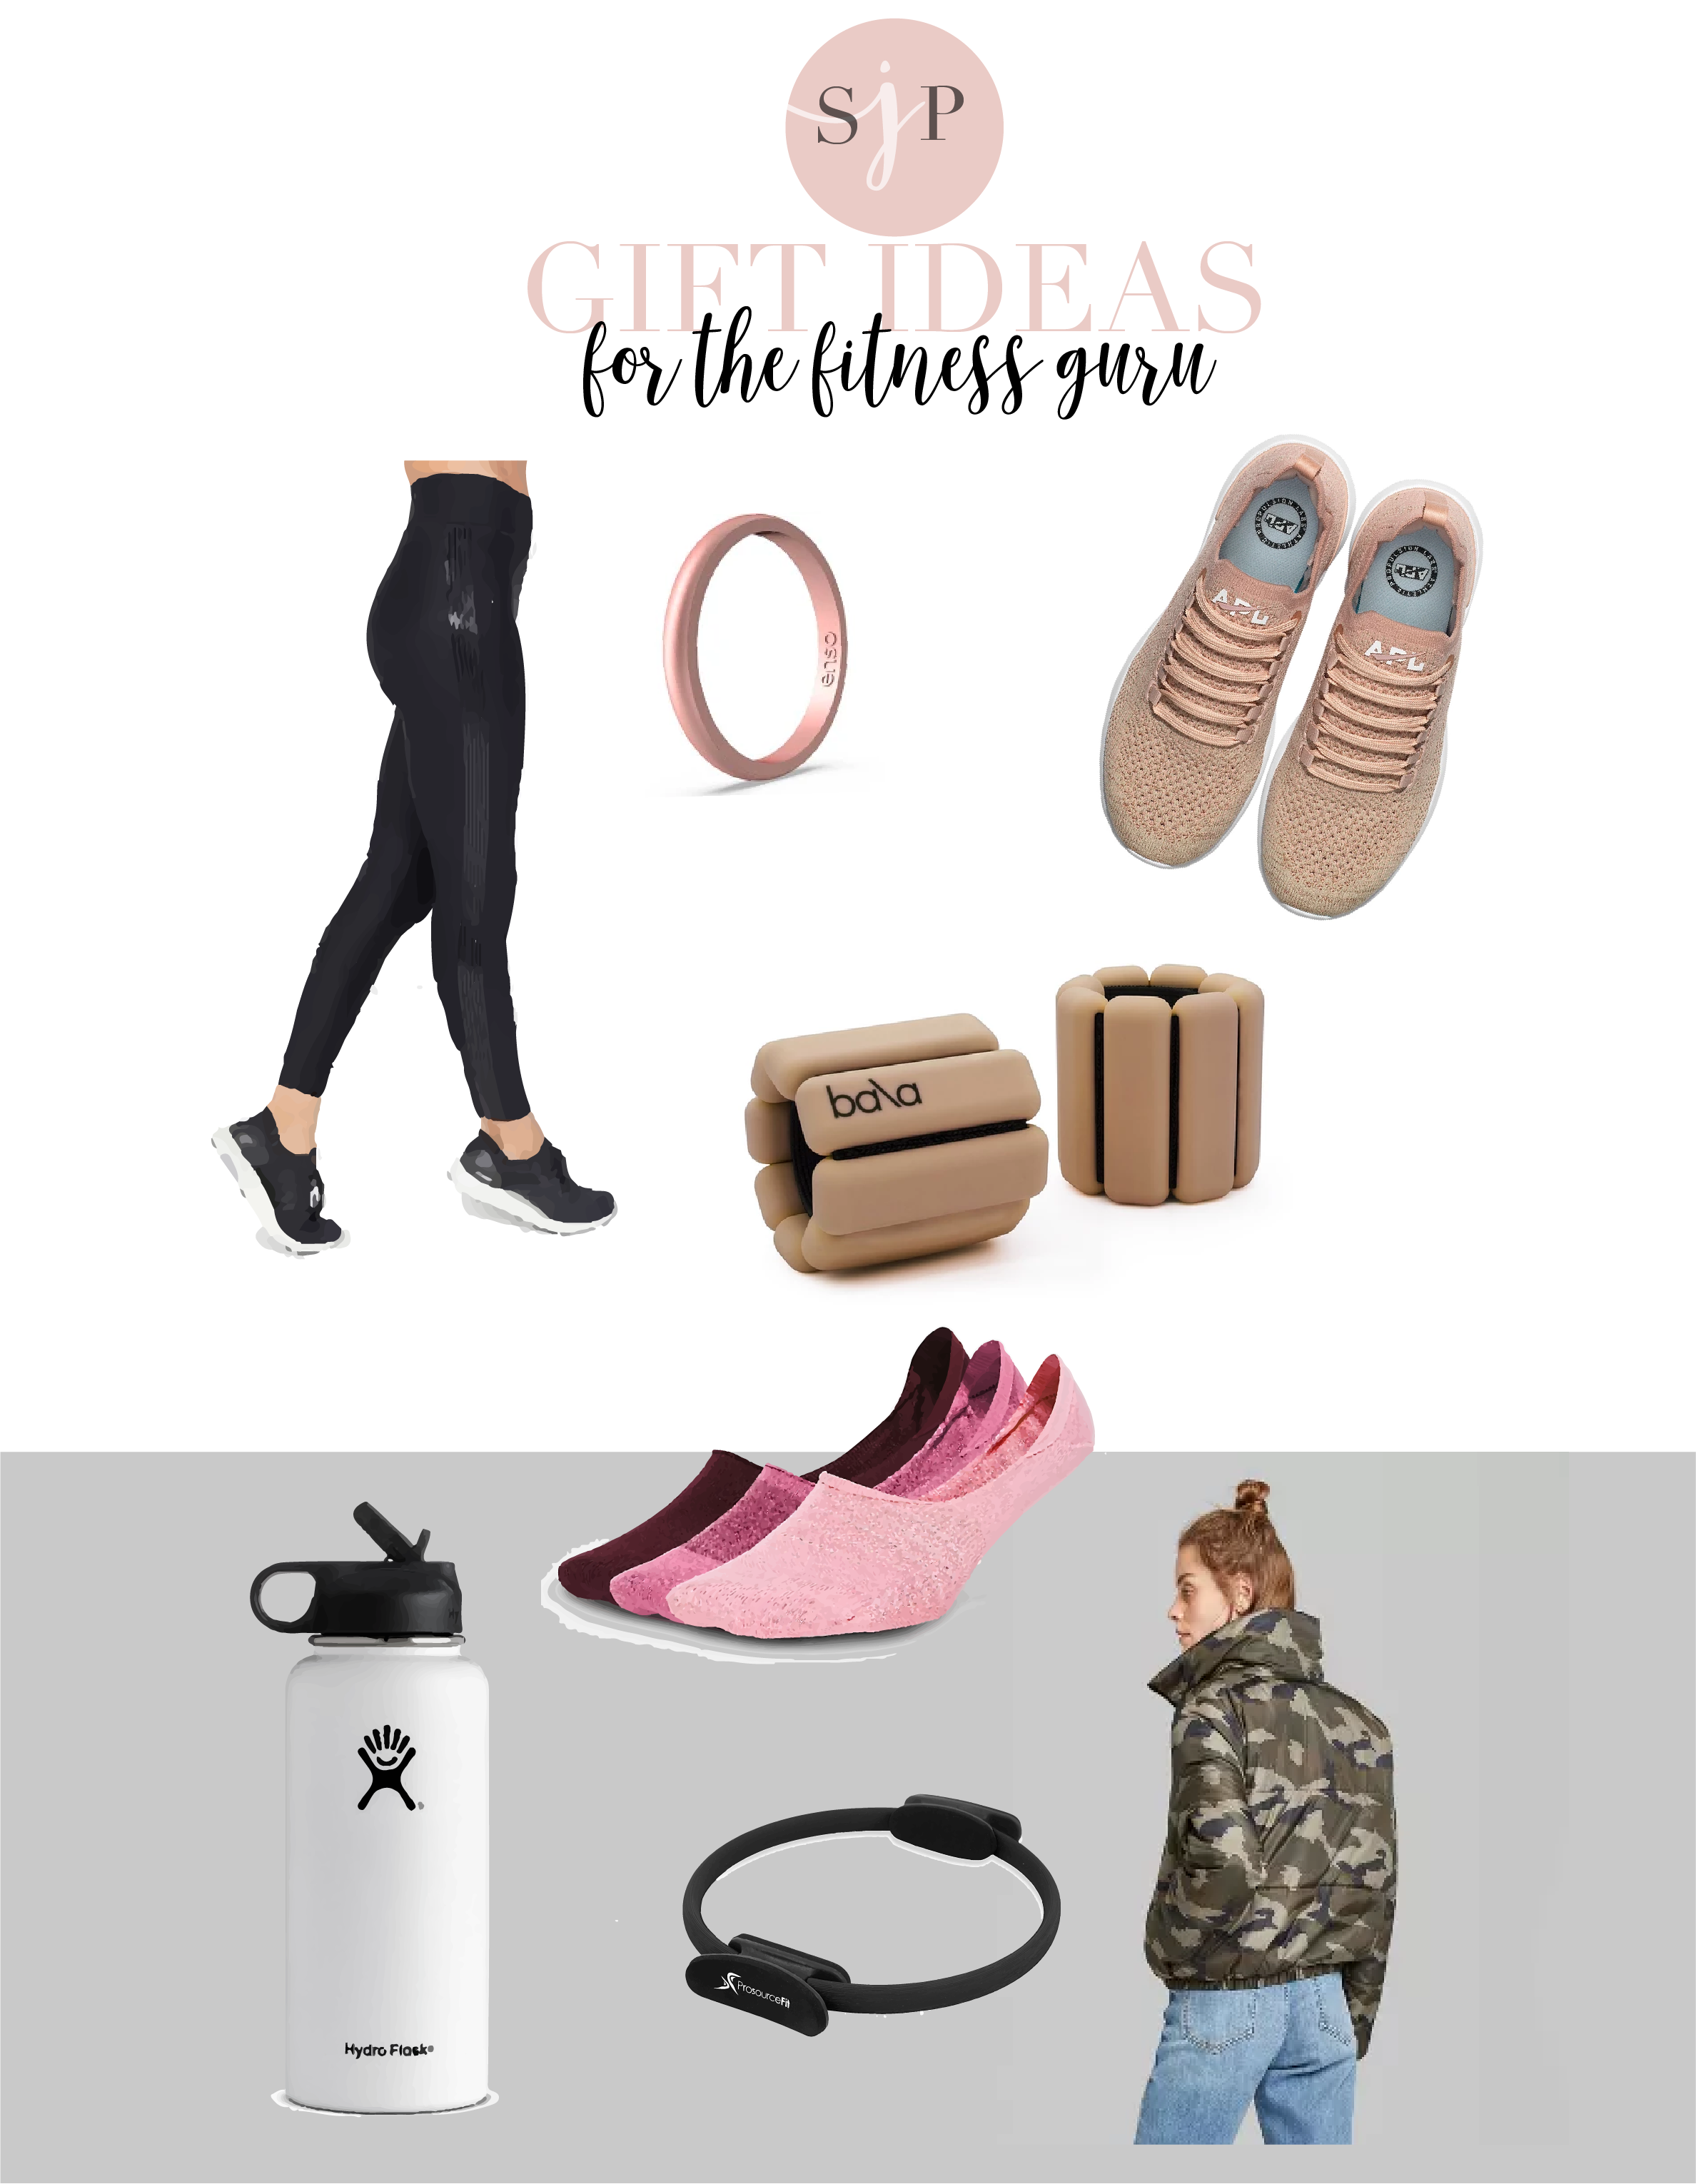 Women's Fitness Holiday Gift Guide  Fitness gifts, Fitness gift guide,  Gifts